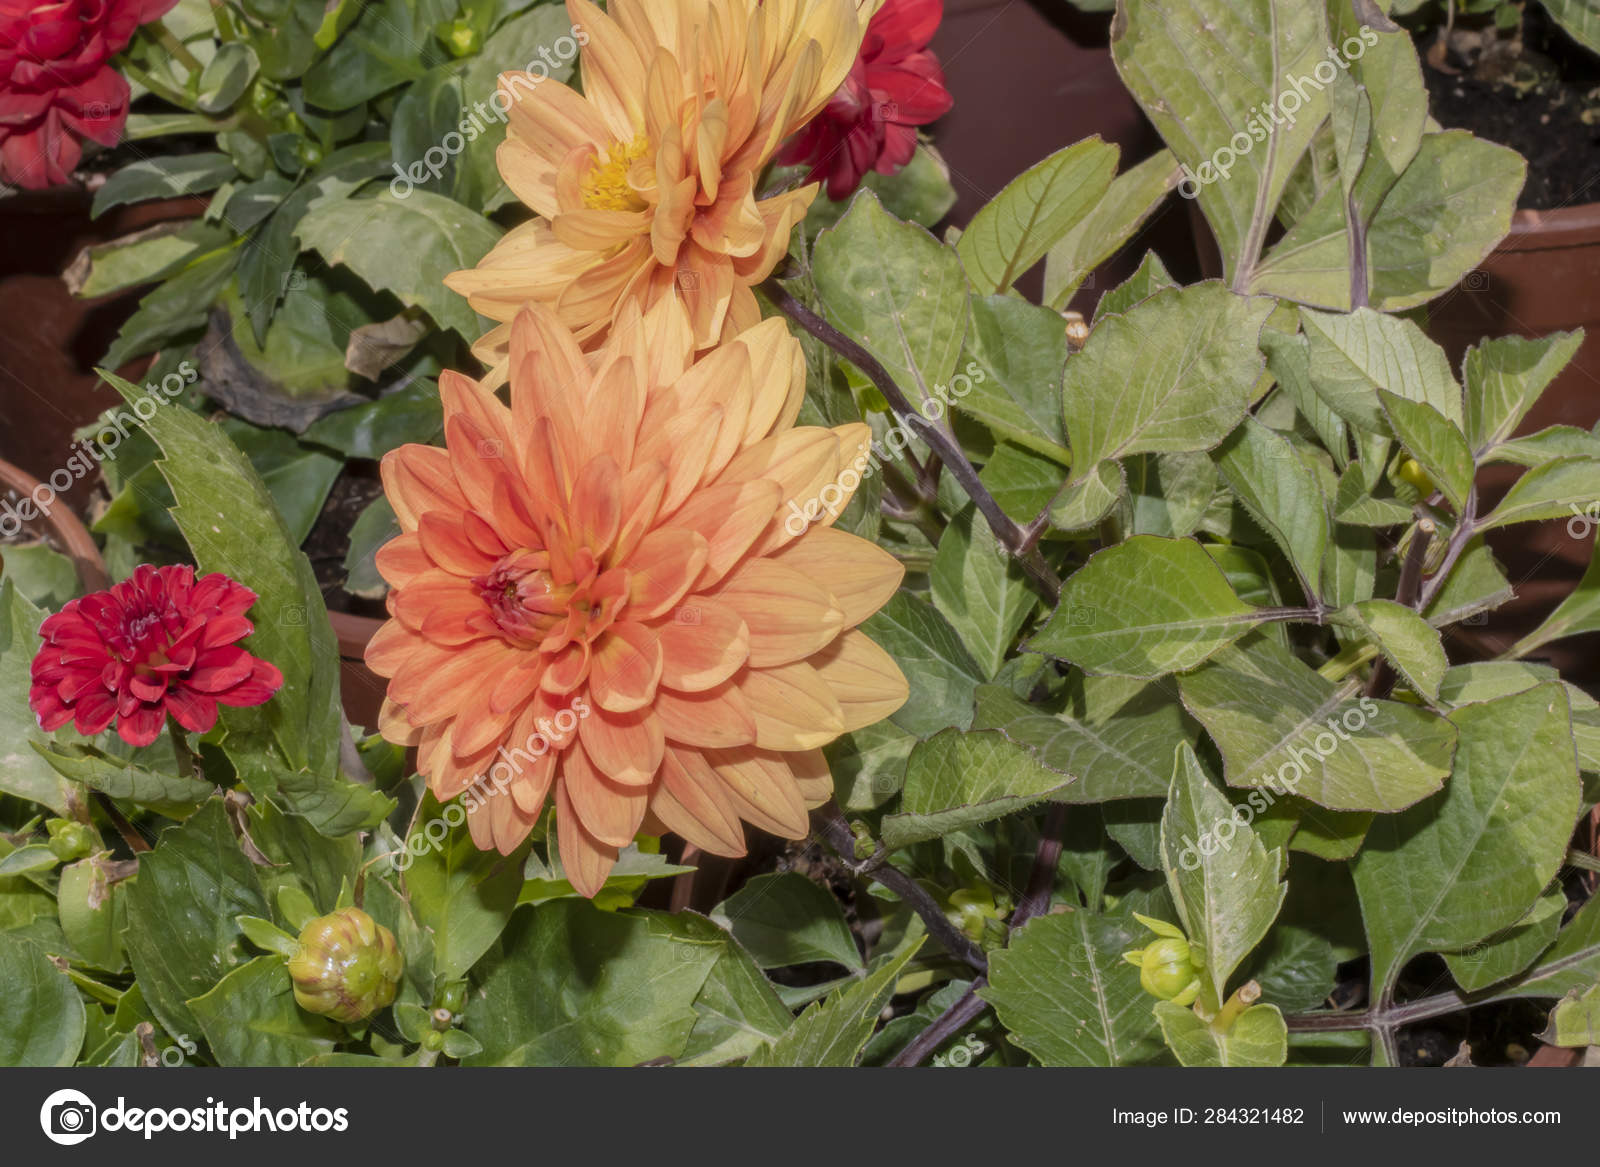 Close Garden Dahlia Flower Colors Green Leaves Orange Red Tones Stock Photo C Canerciftci 284321482